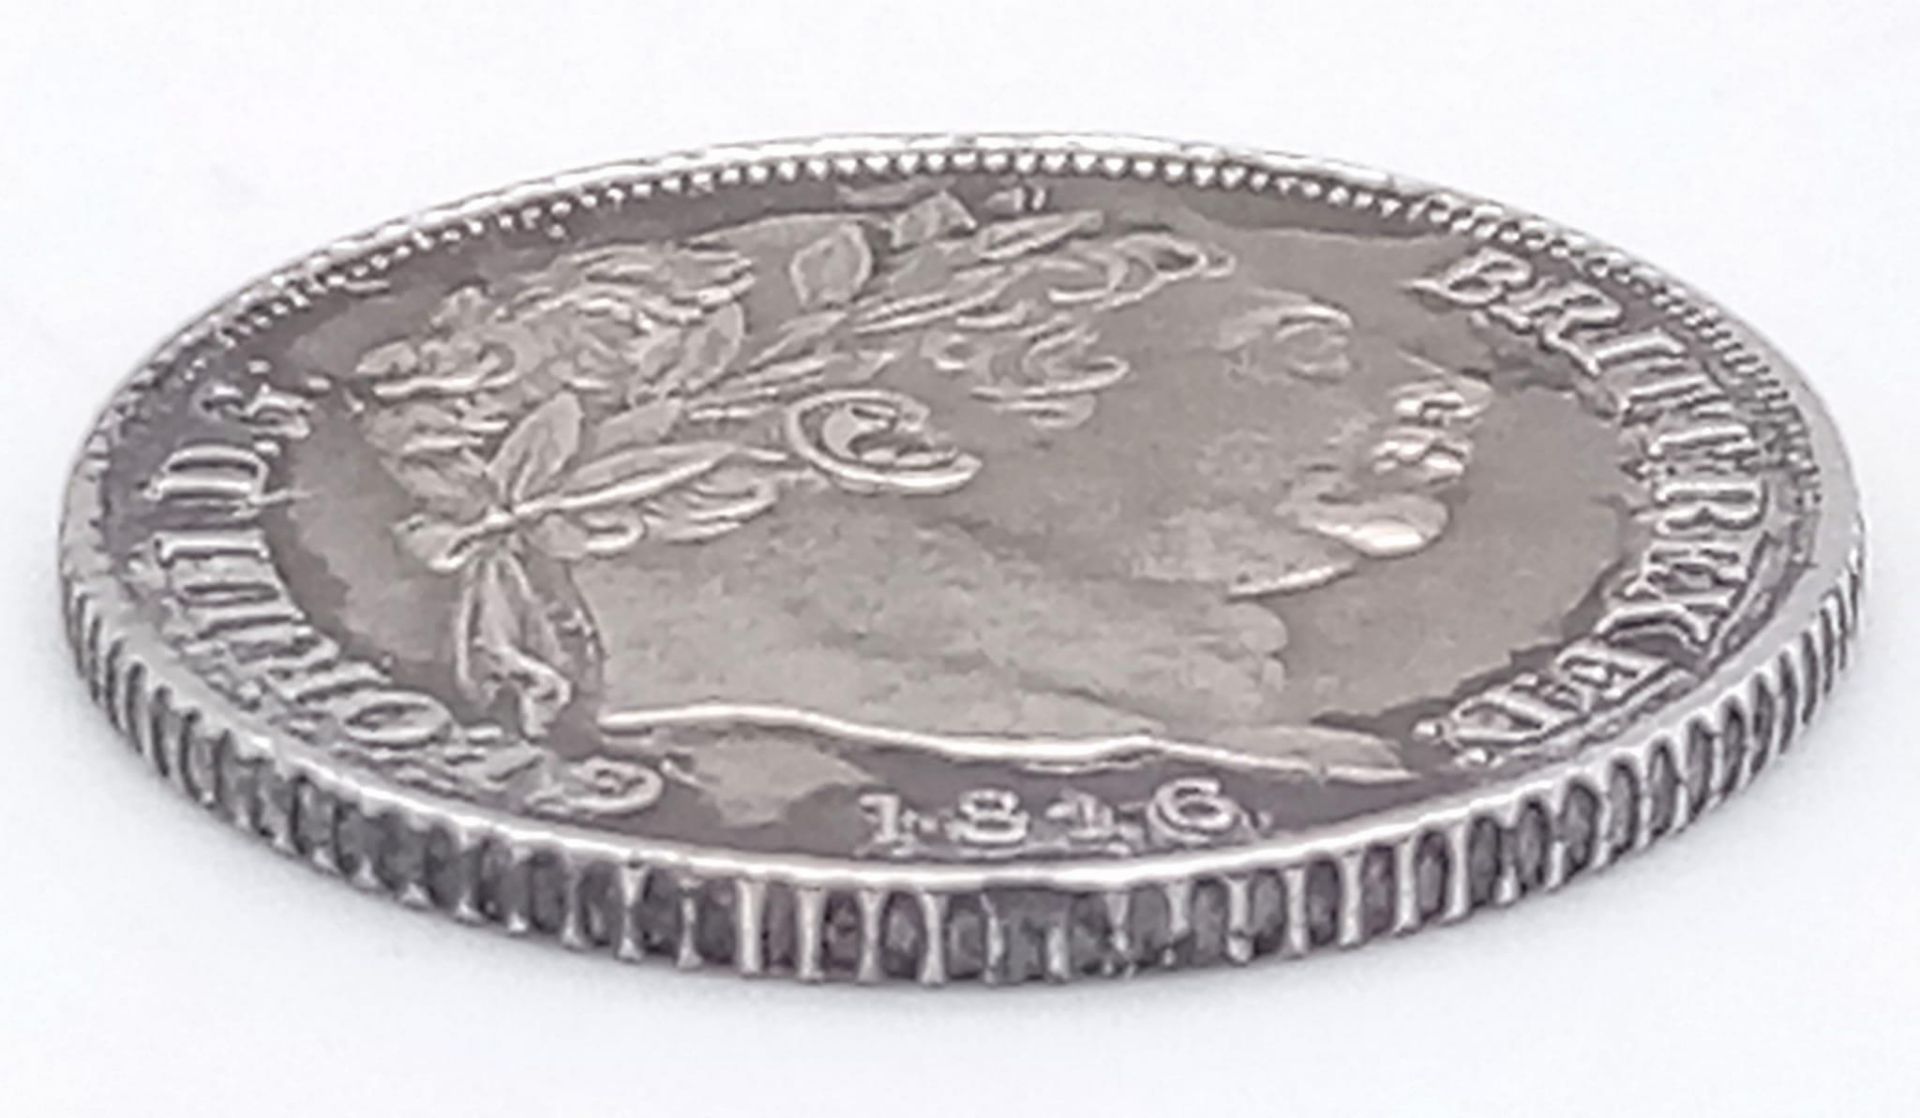 An 1816 George III British Silver Sixpence Coin. A decent grade but please see photos. - Image 8 of 10